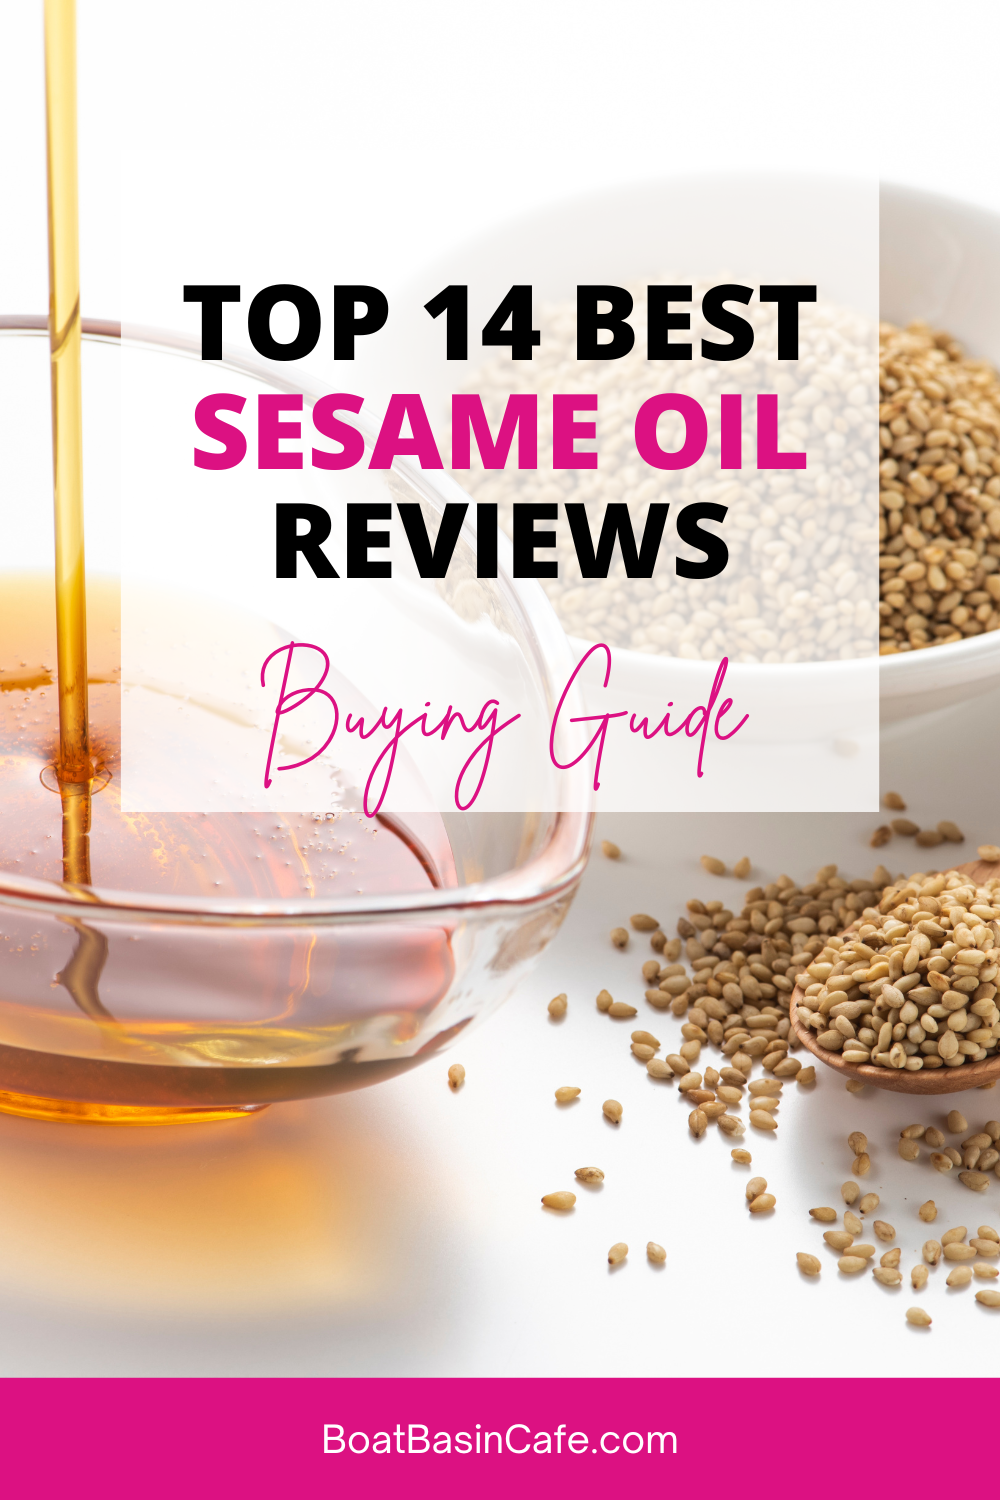 Top 14 Best Sesame Oil Reviews & Buying Guide 1